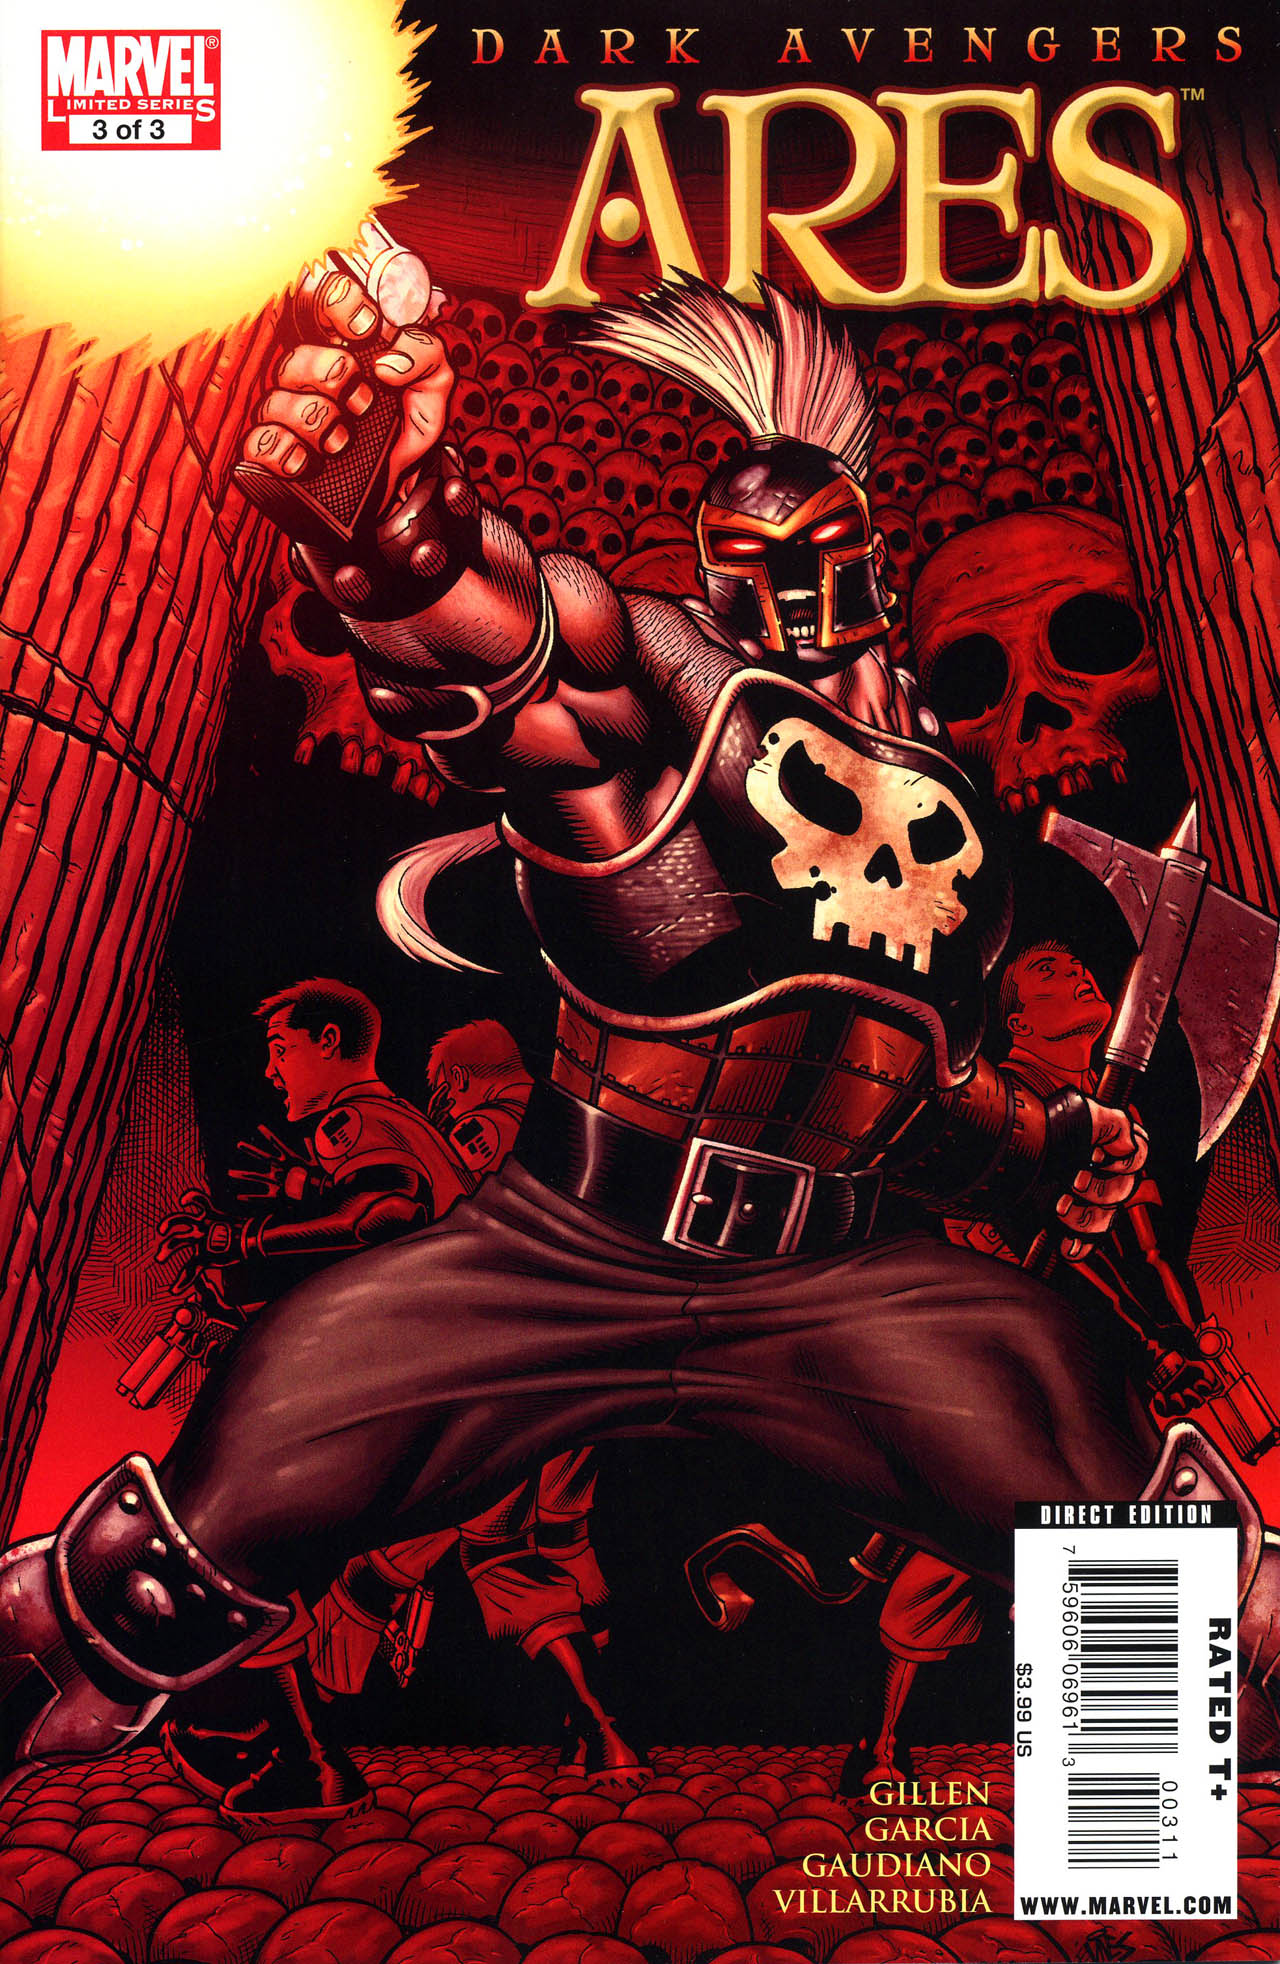 Read online Dark Avengers: Ares comic -  Issue #3 - 1